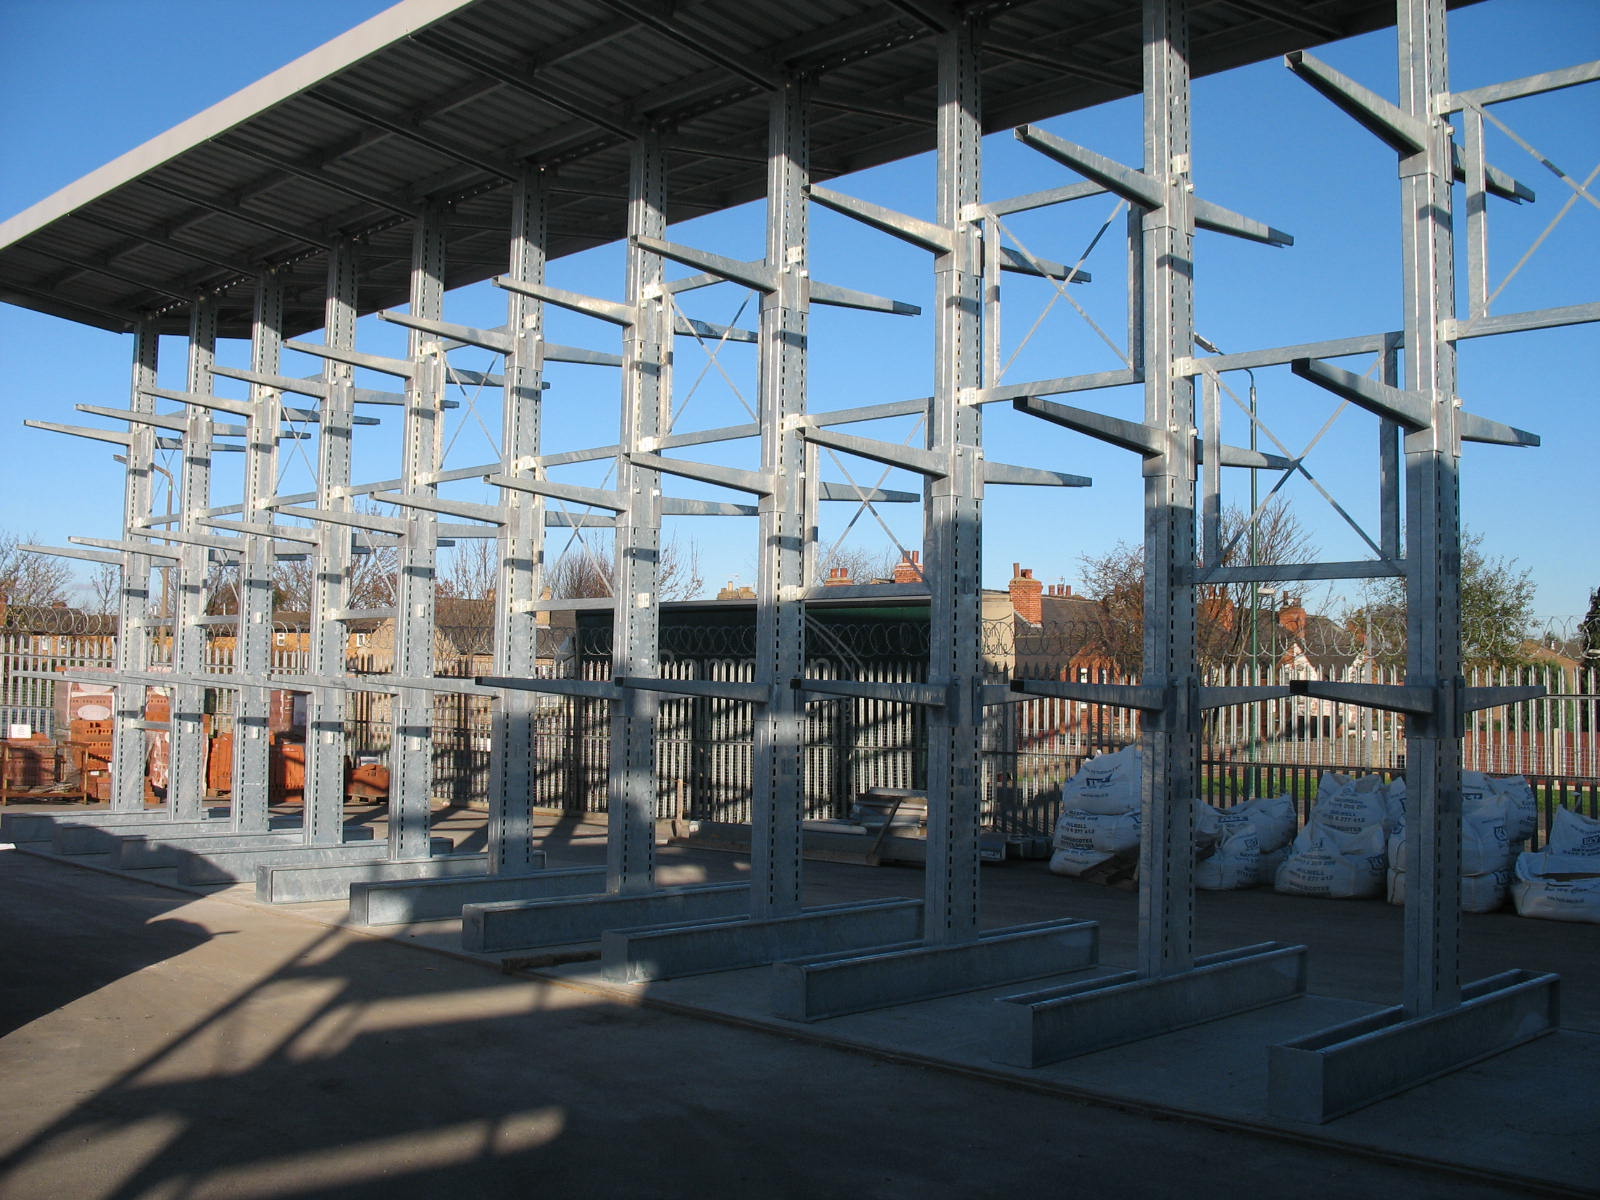 External Galvanised Cantilever Racking with Canopy Roof for Carcassing Timber Storage